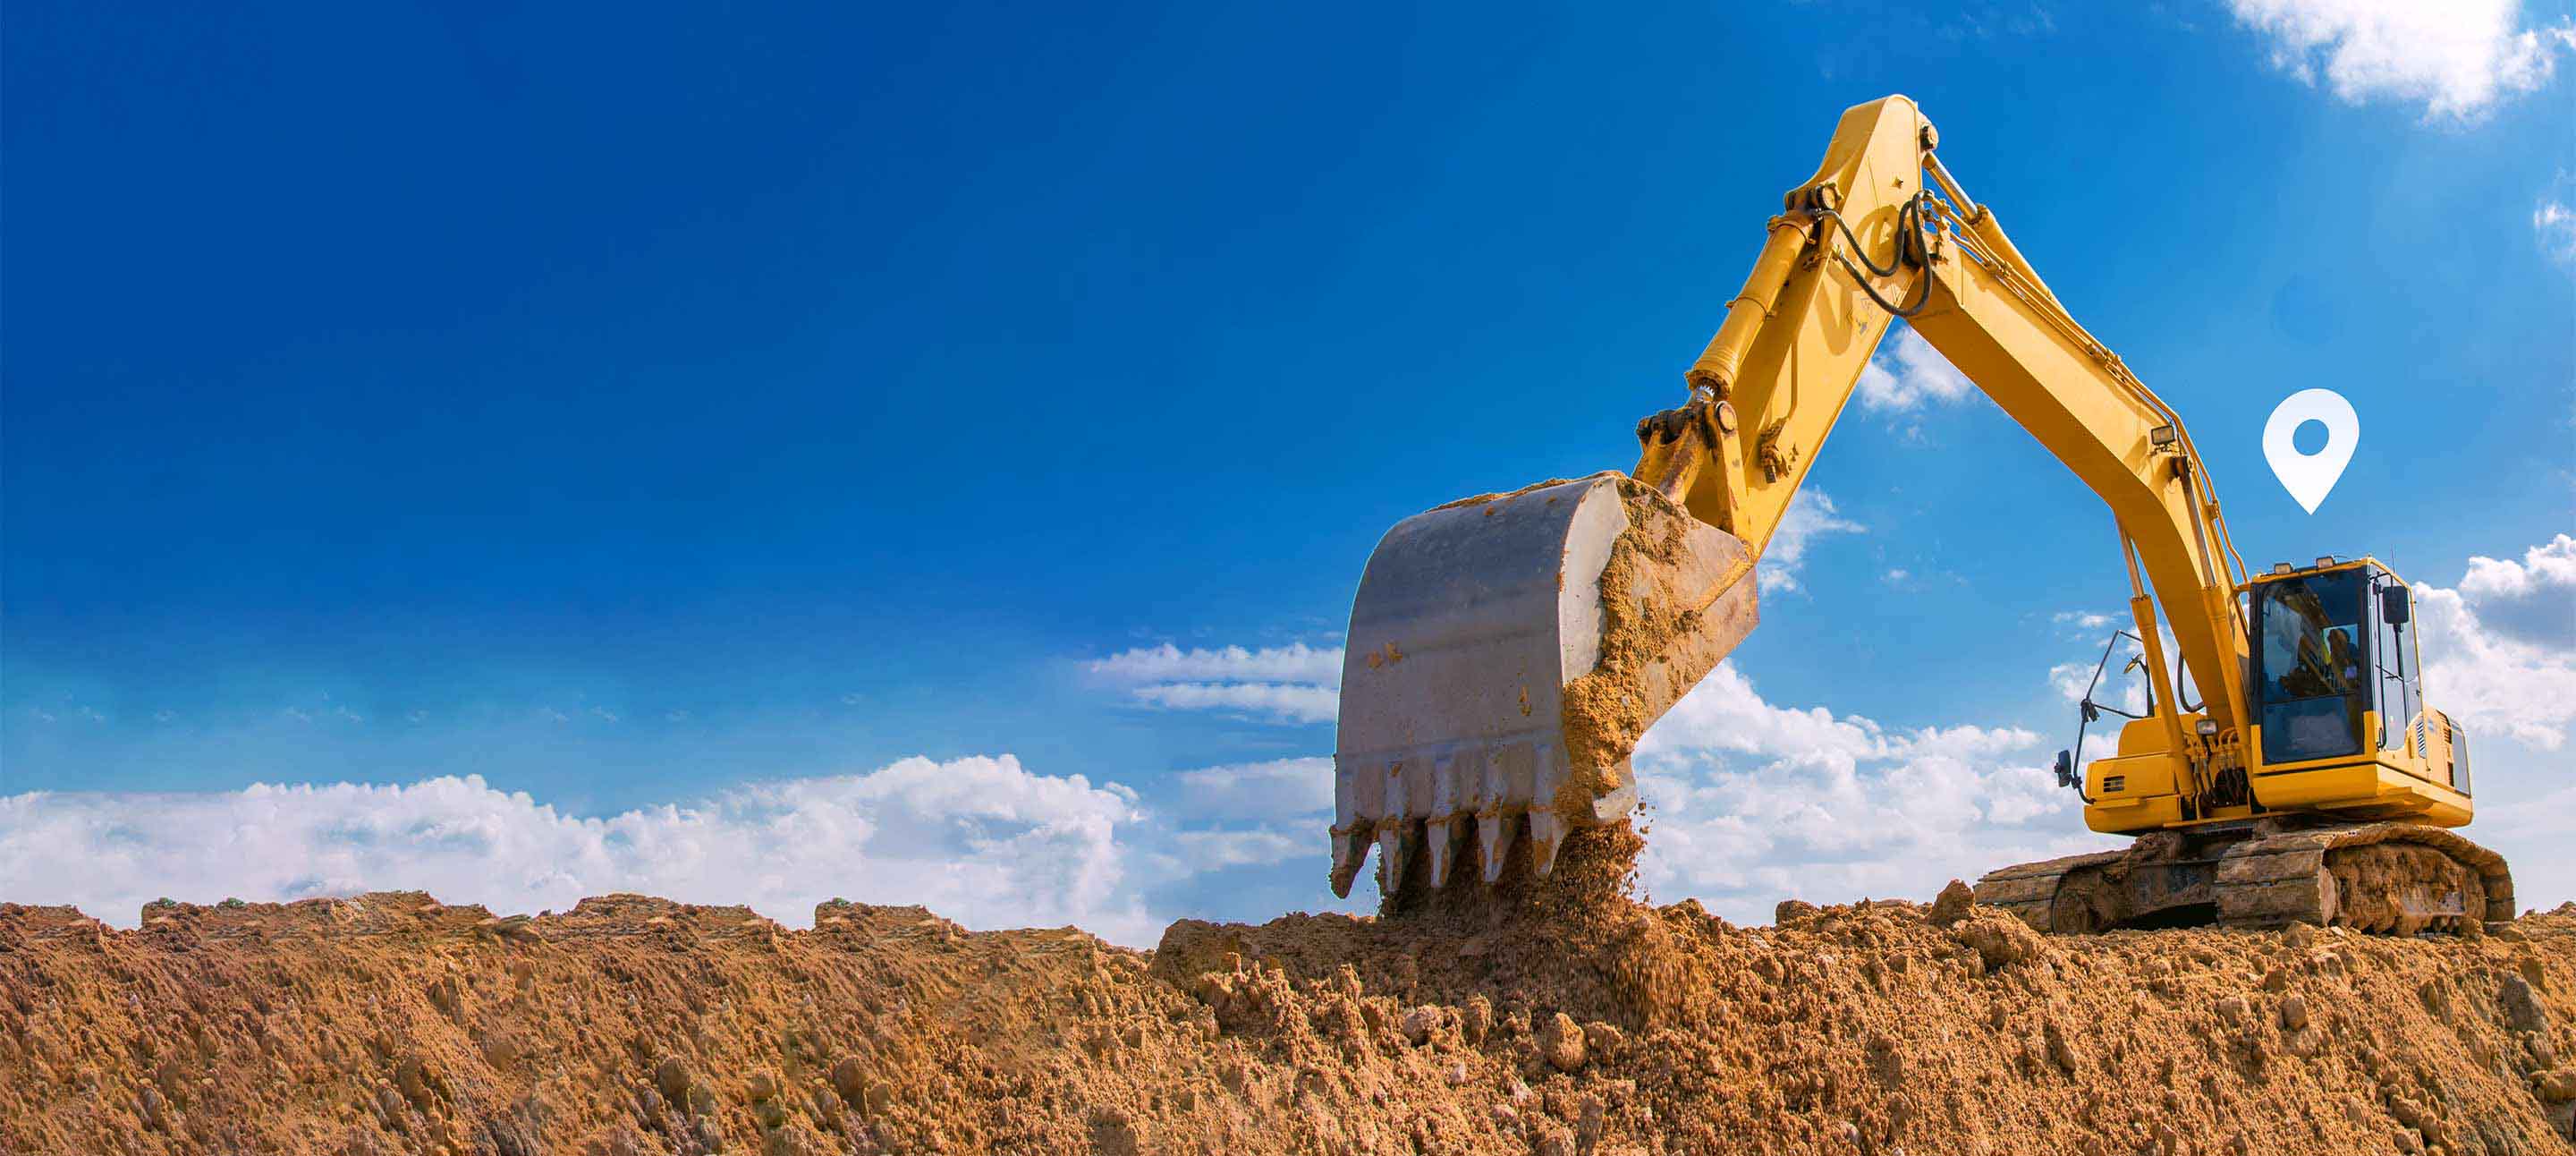 Yellow excavator picking up dirt being tracked using Geotab software